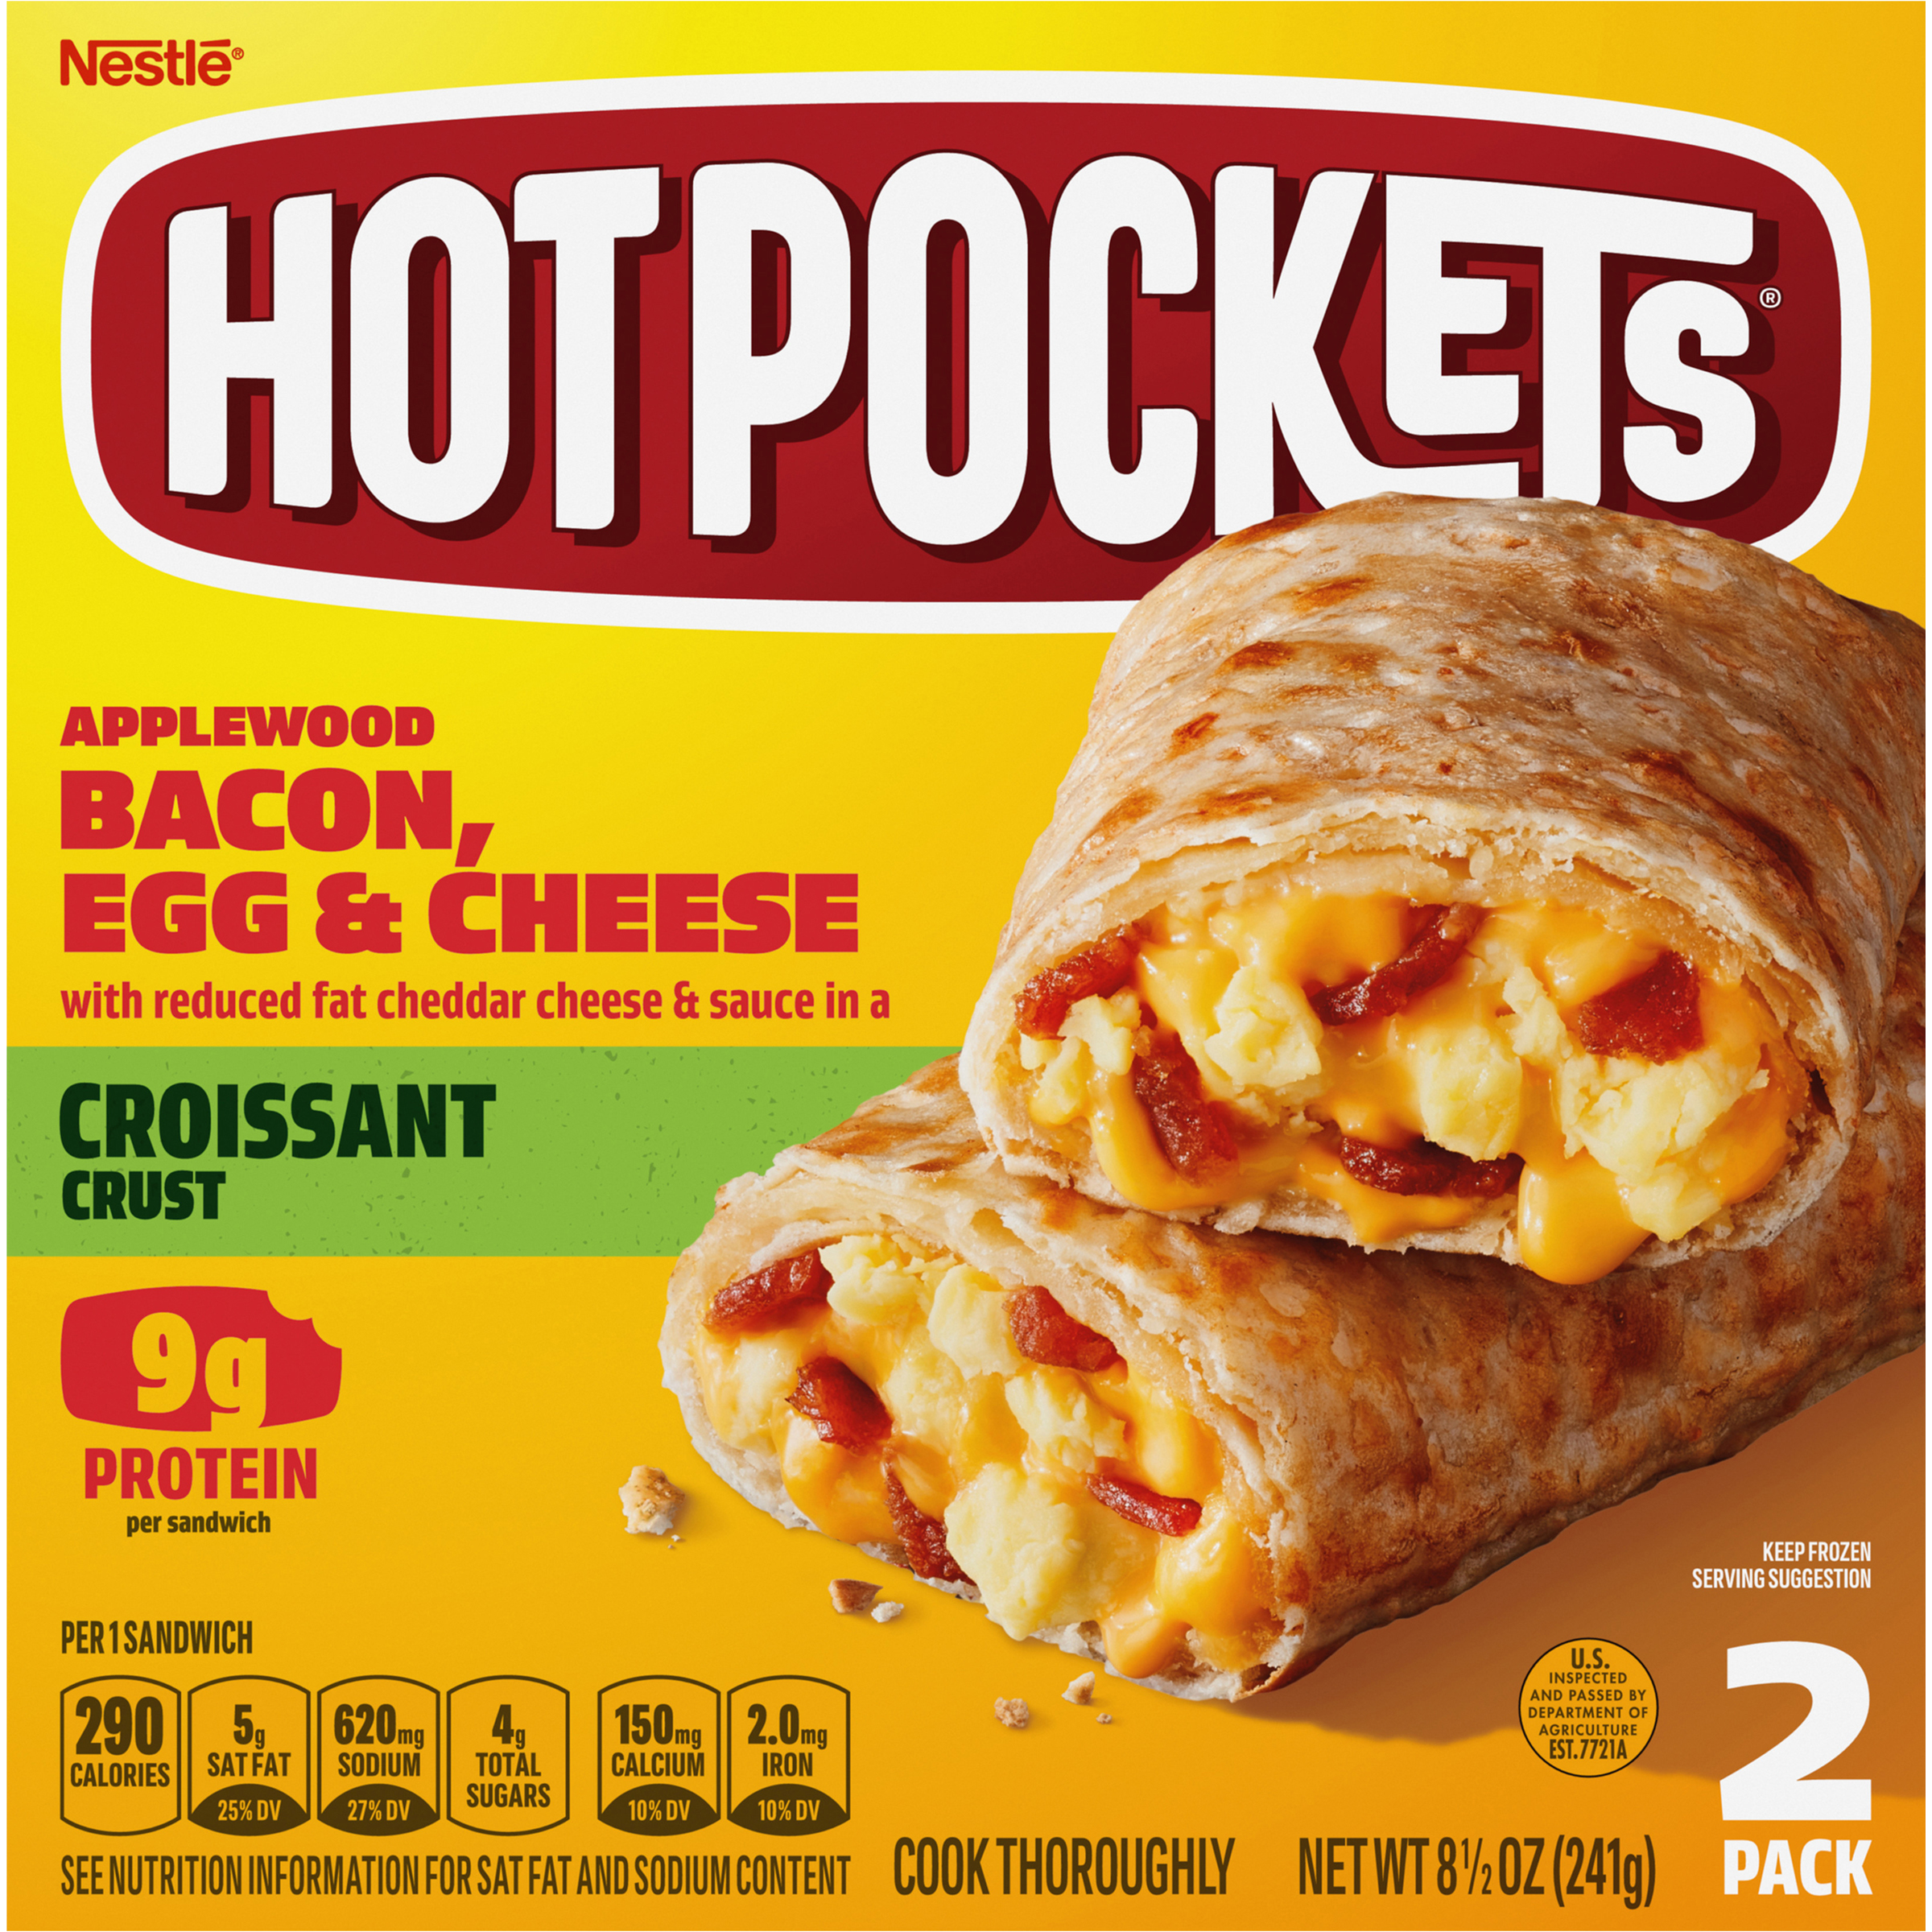 HOT POCKETS Applewood Bacon, Egg, & Cheese 8 units per case 8.5 oz